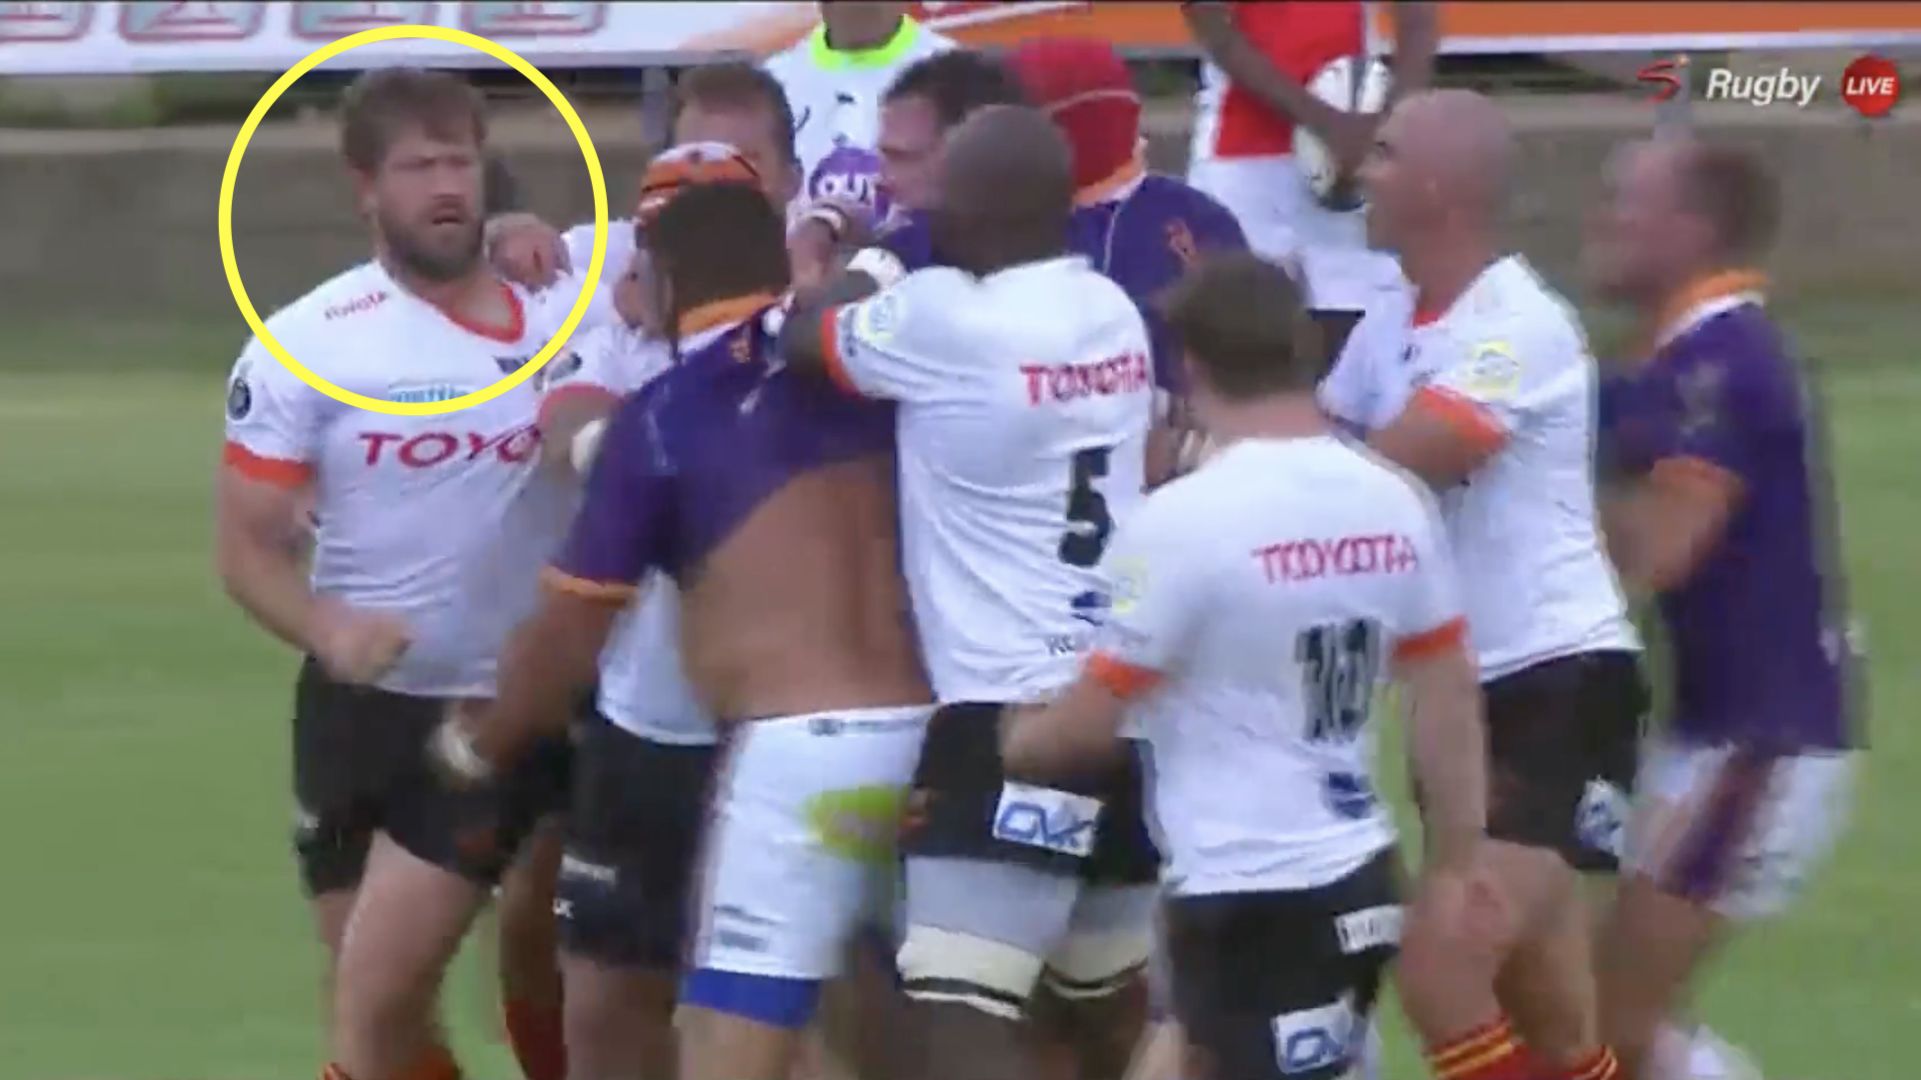 Frans Steyn starts mass brawl after most humiliating hit of his career